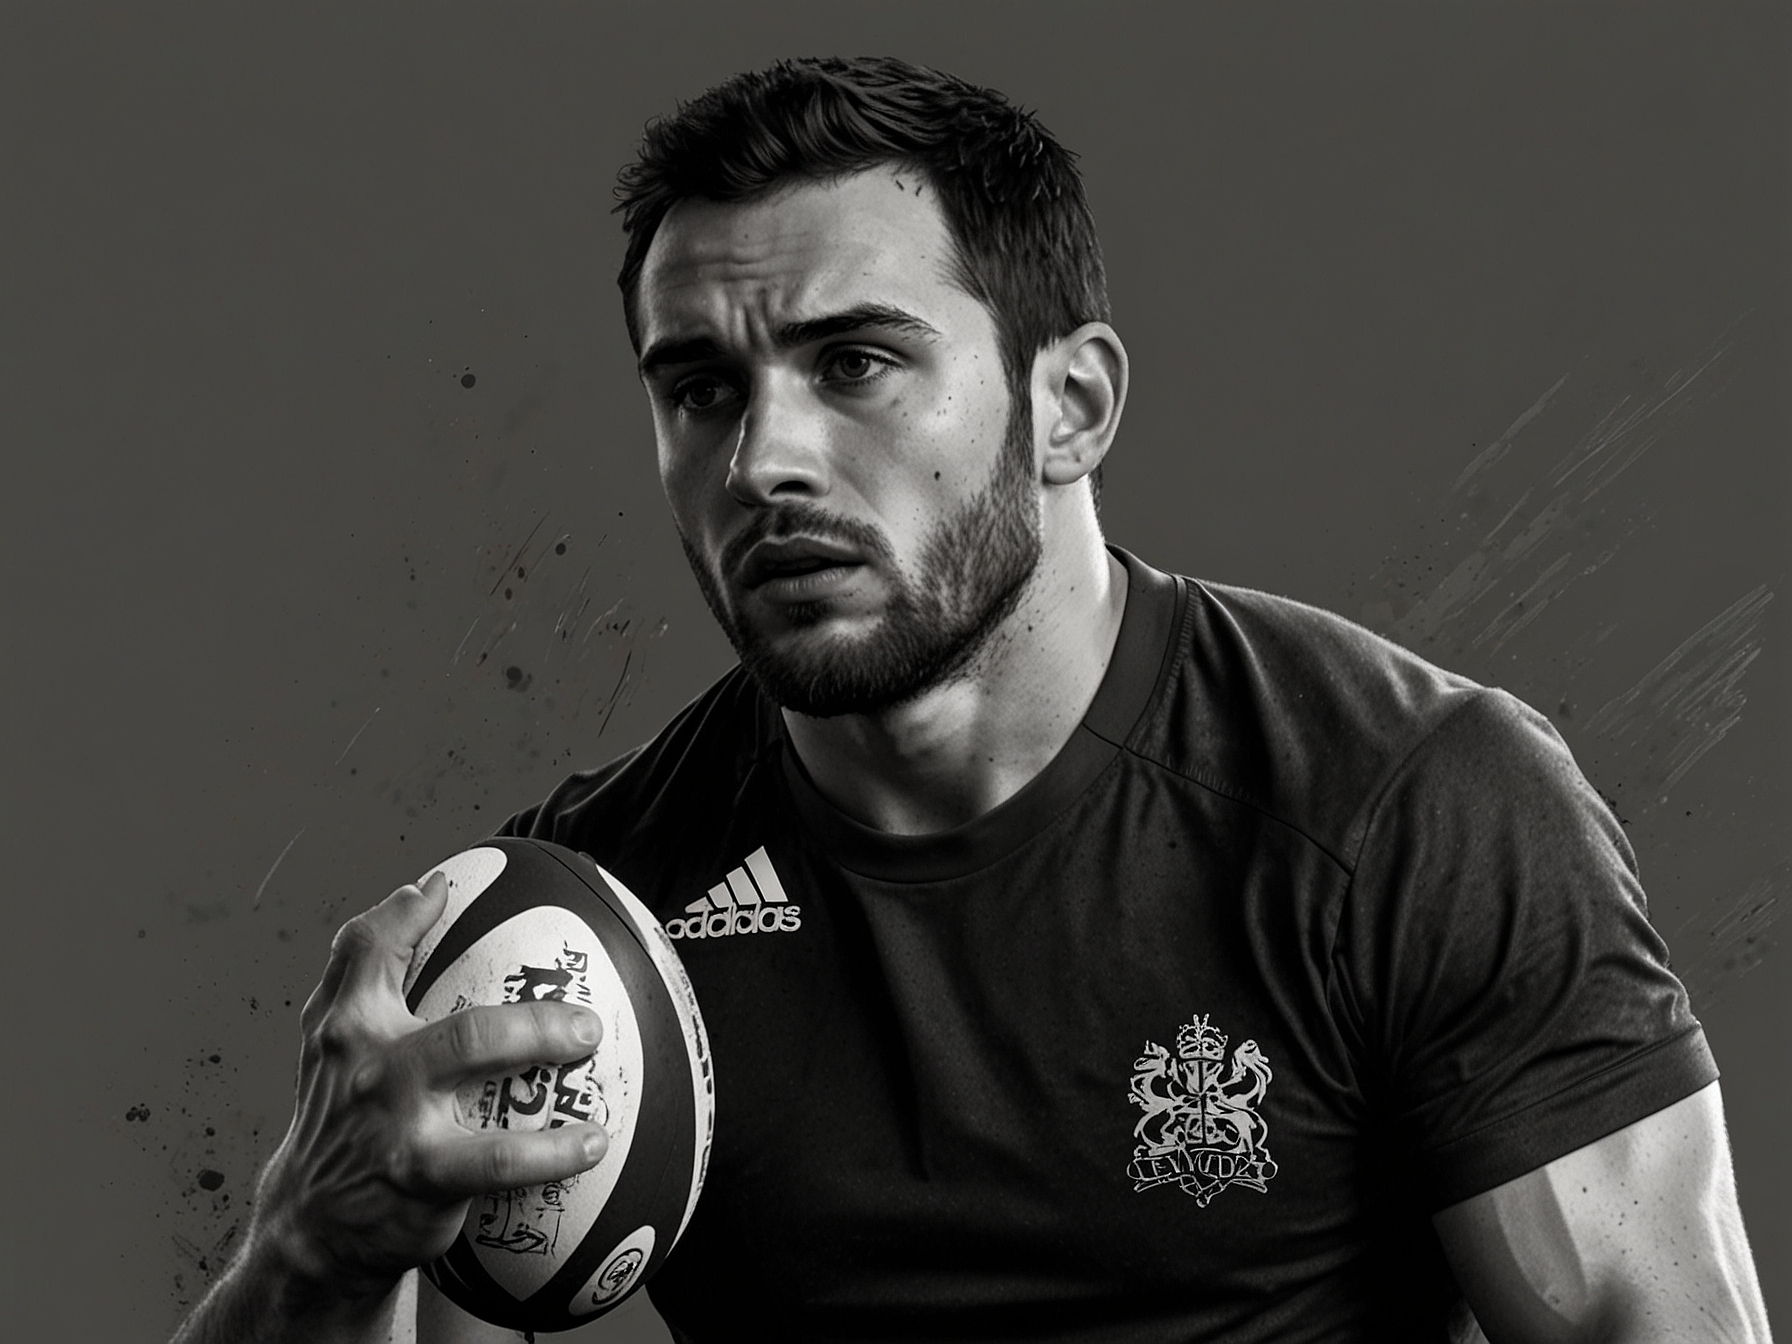 Elliot Minchella is depicted in an intense training session, showcasing his dedication and preparation for the England rugby team, with a focus on his determined expression.